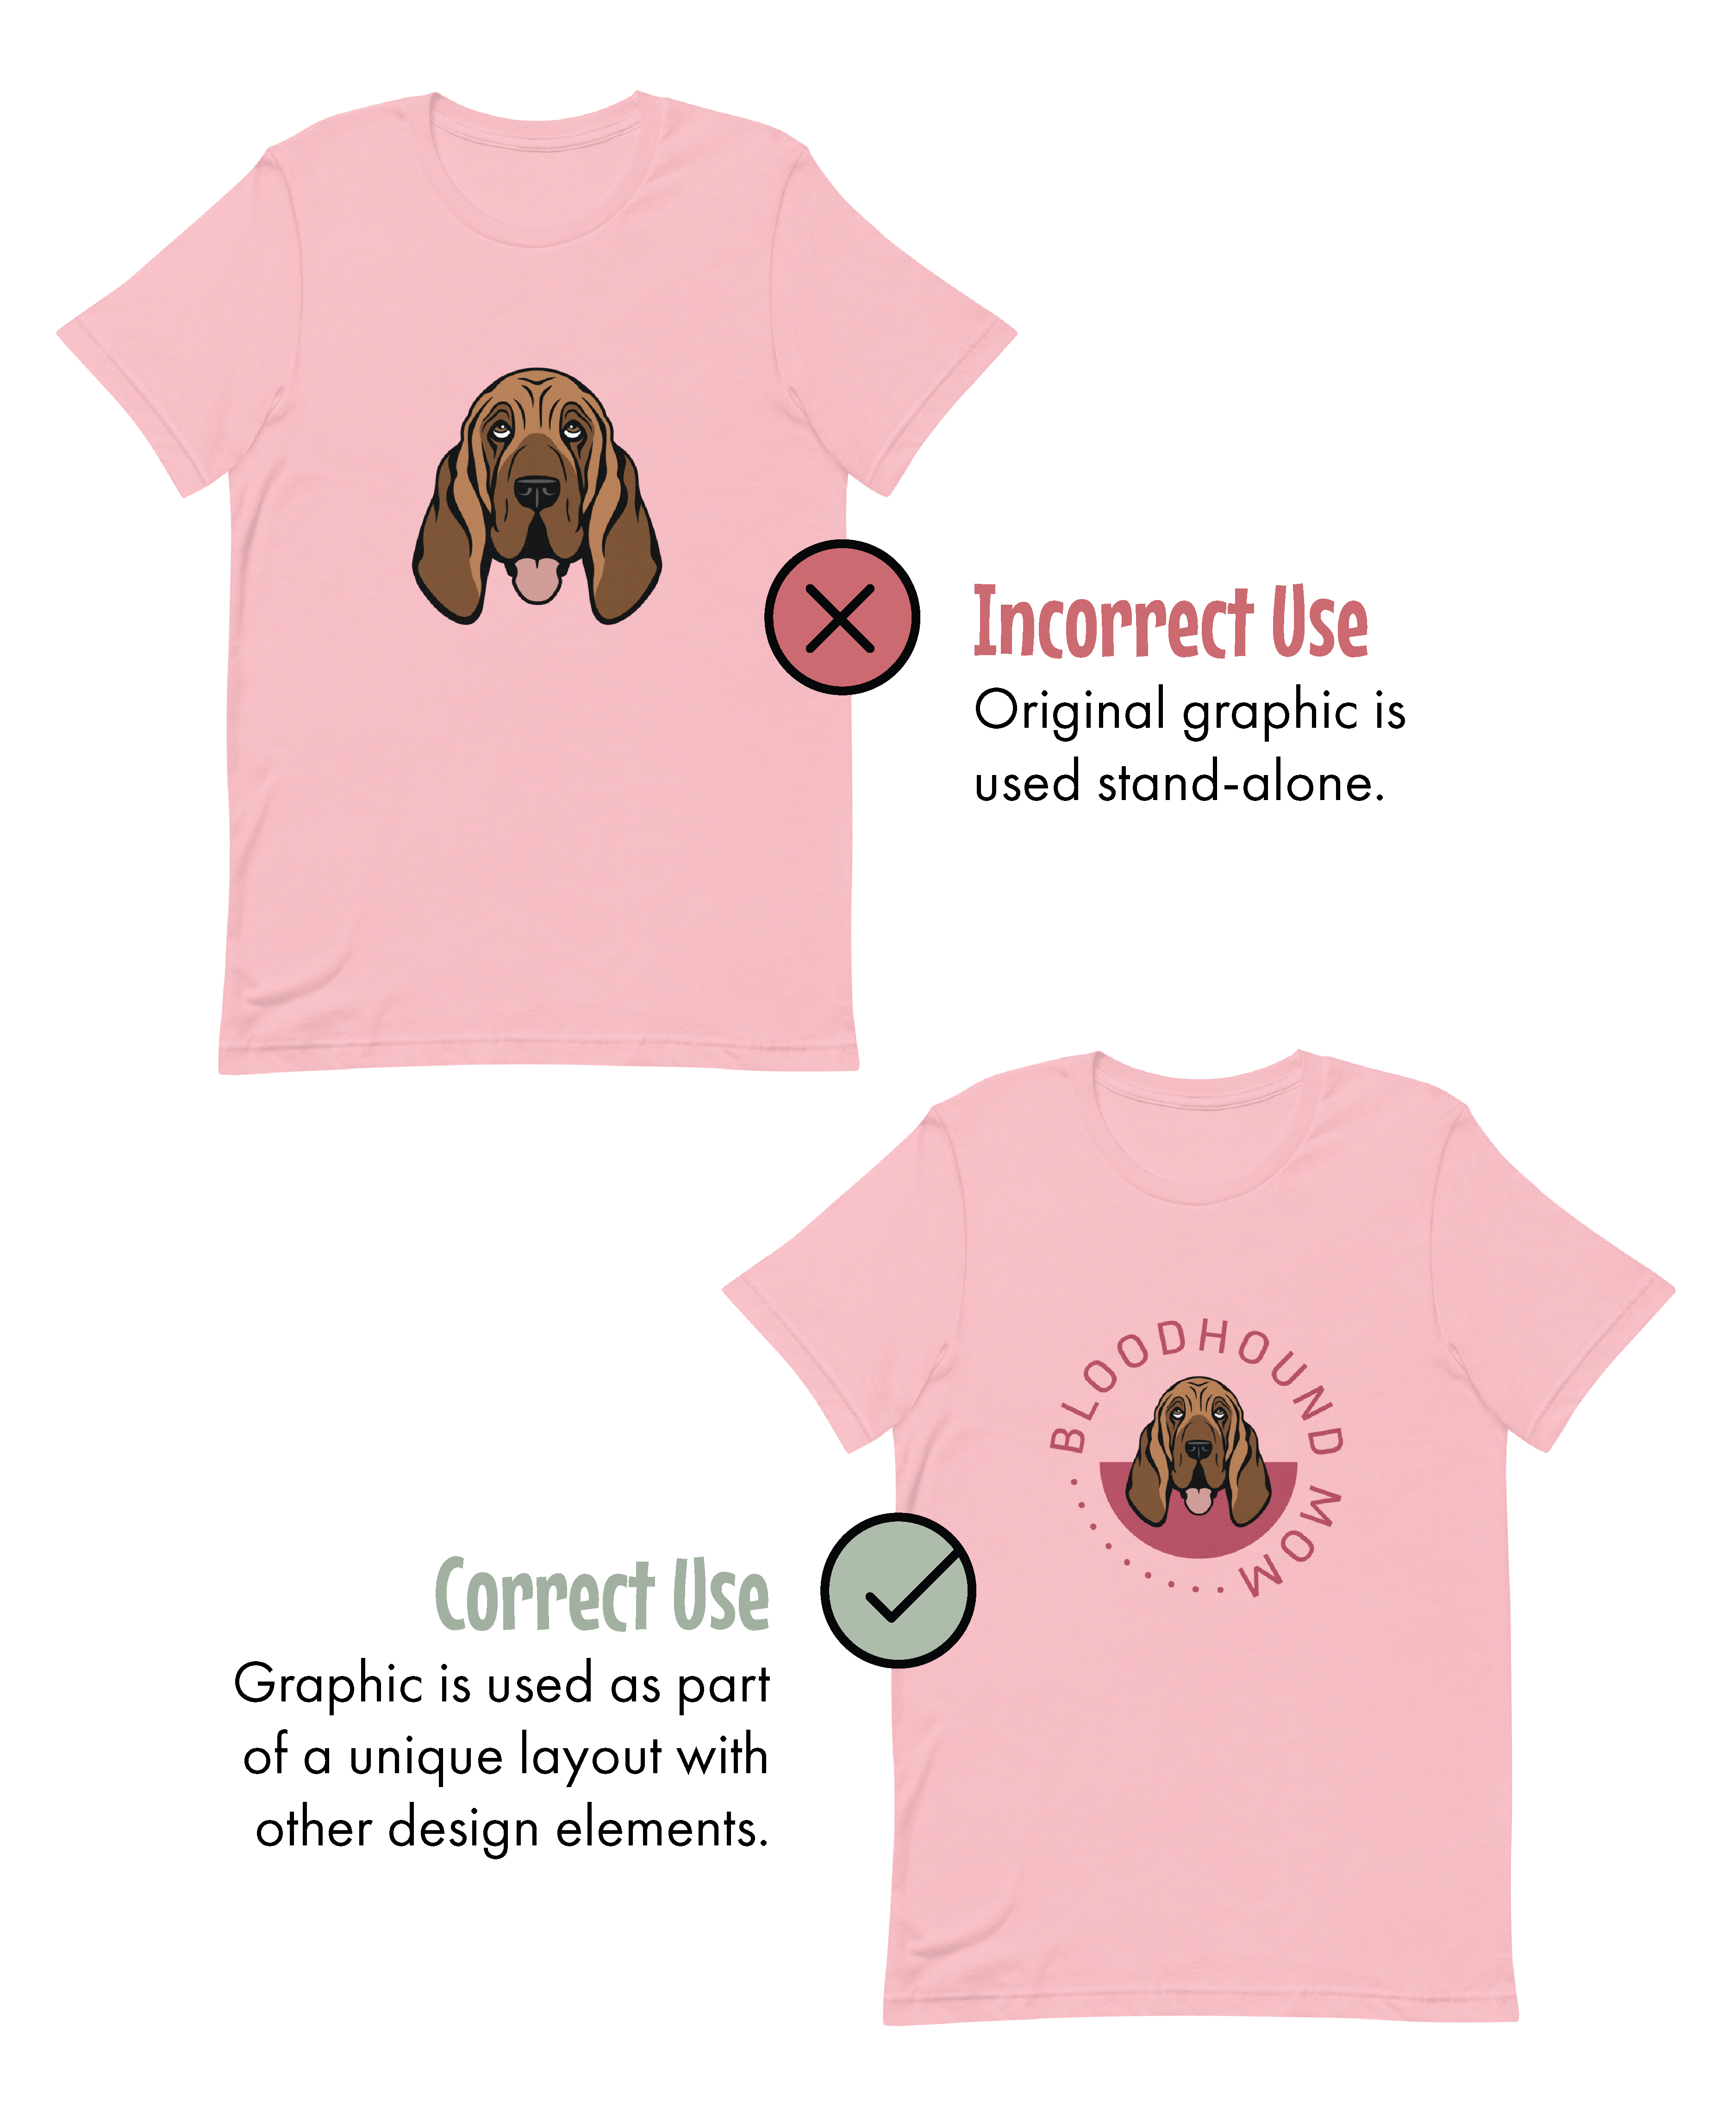 Incorrect use - Original dog face graphic is used stand-alone on a shirt. Correct use - Dog face graphic is used as part of a unique layout with other design elements on a shirt.